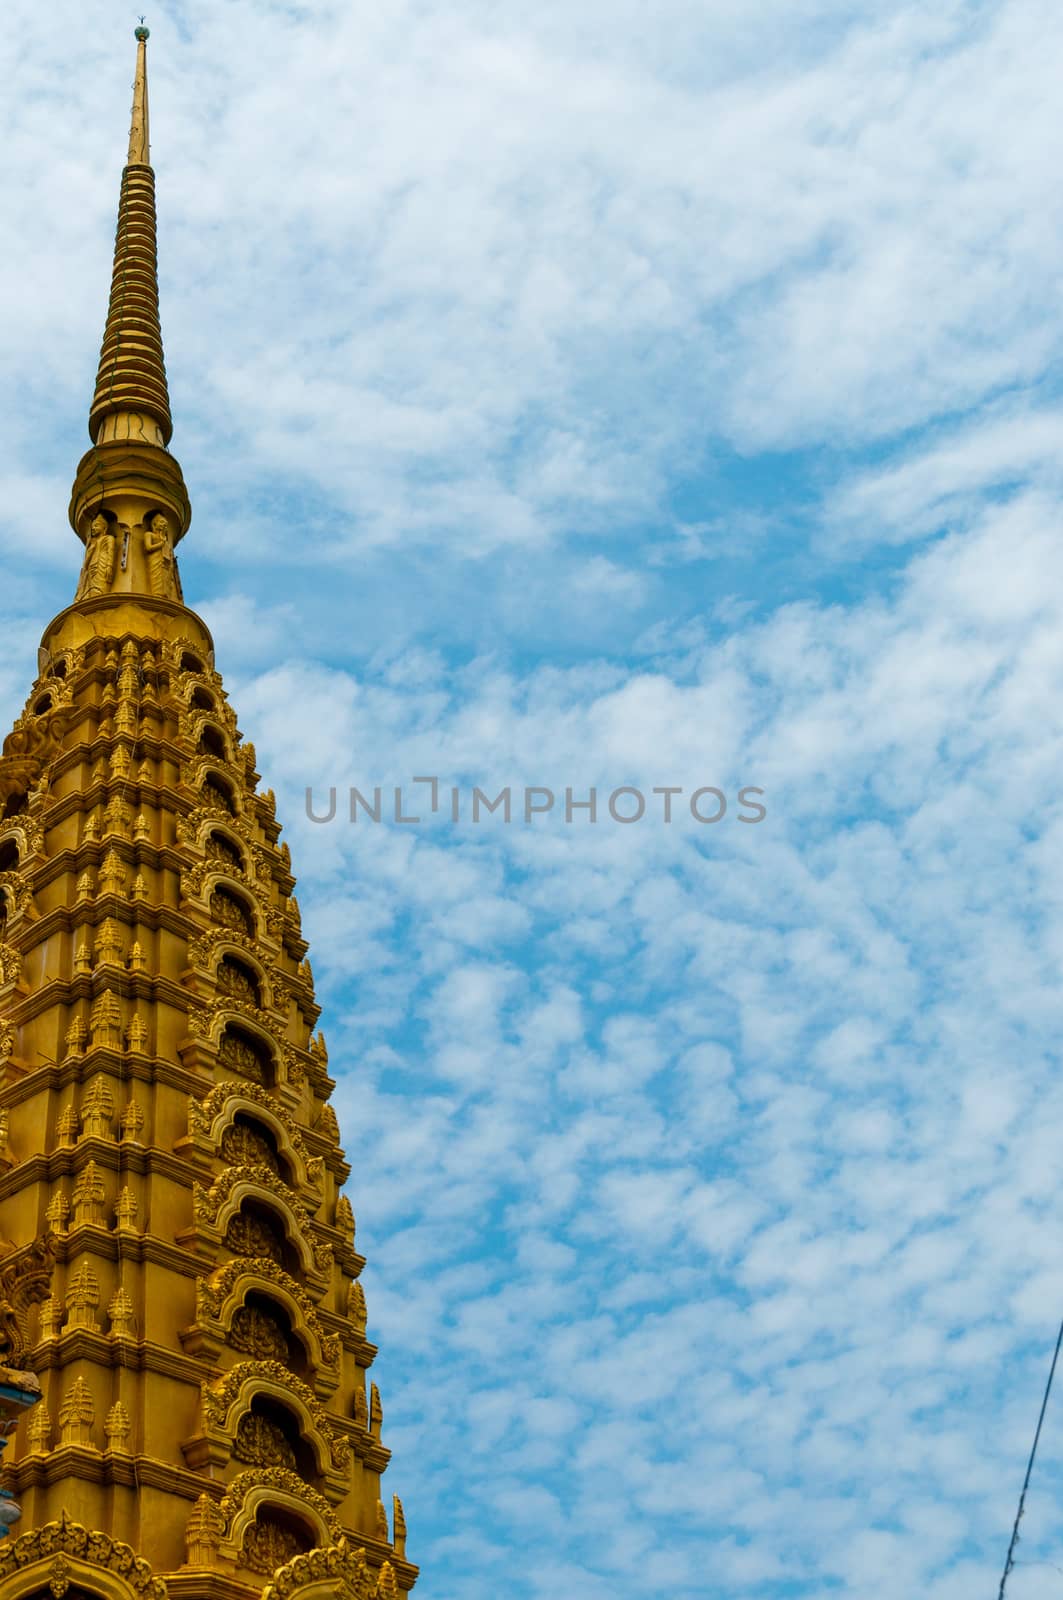 Temple Golden Top in front of beautiful blue and cloudy sky by attiarndt